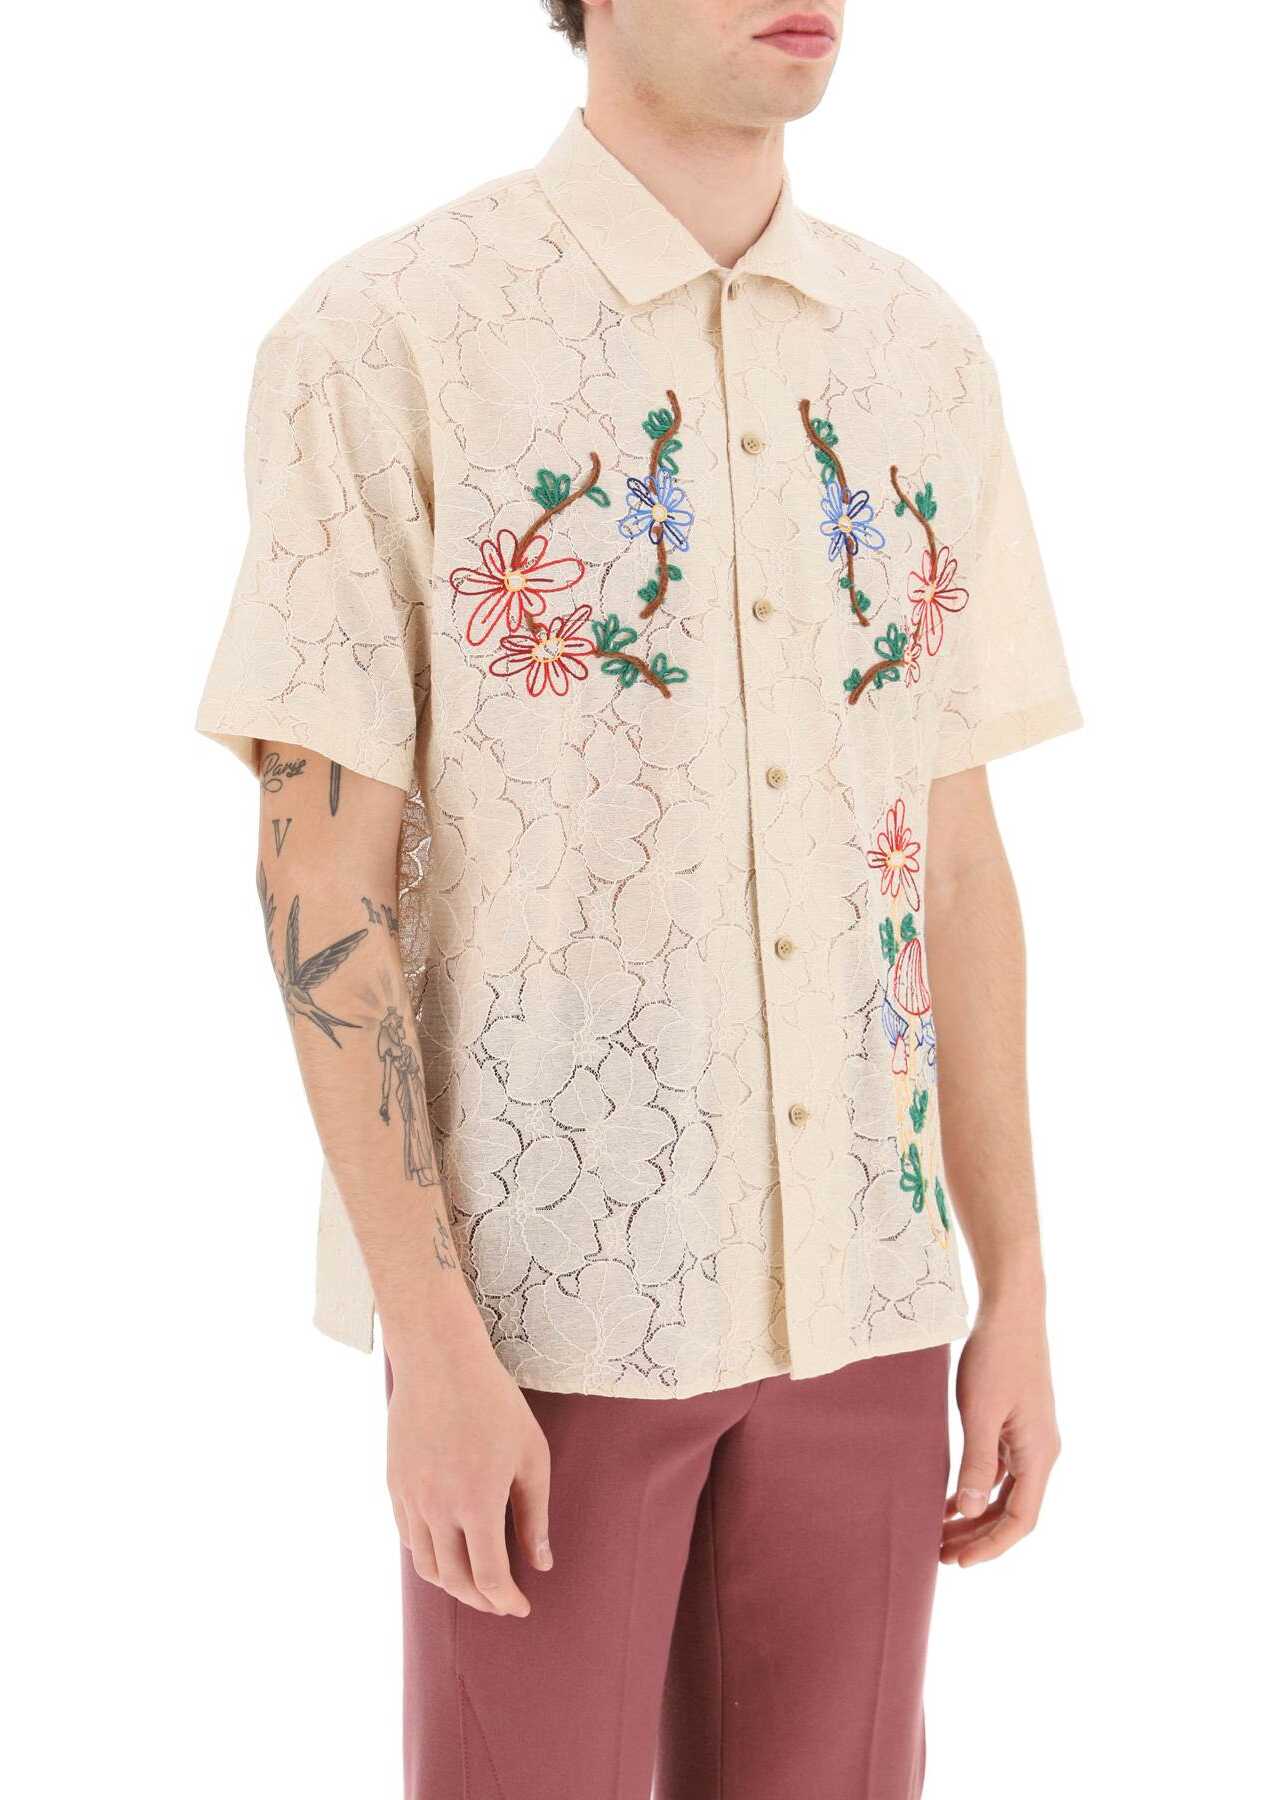 ANDERSSON BELL Lace Shirt Featuring Embroidered Flowers And Mushrooms ECRU